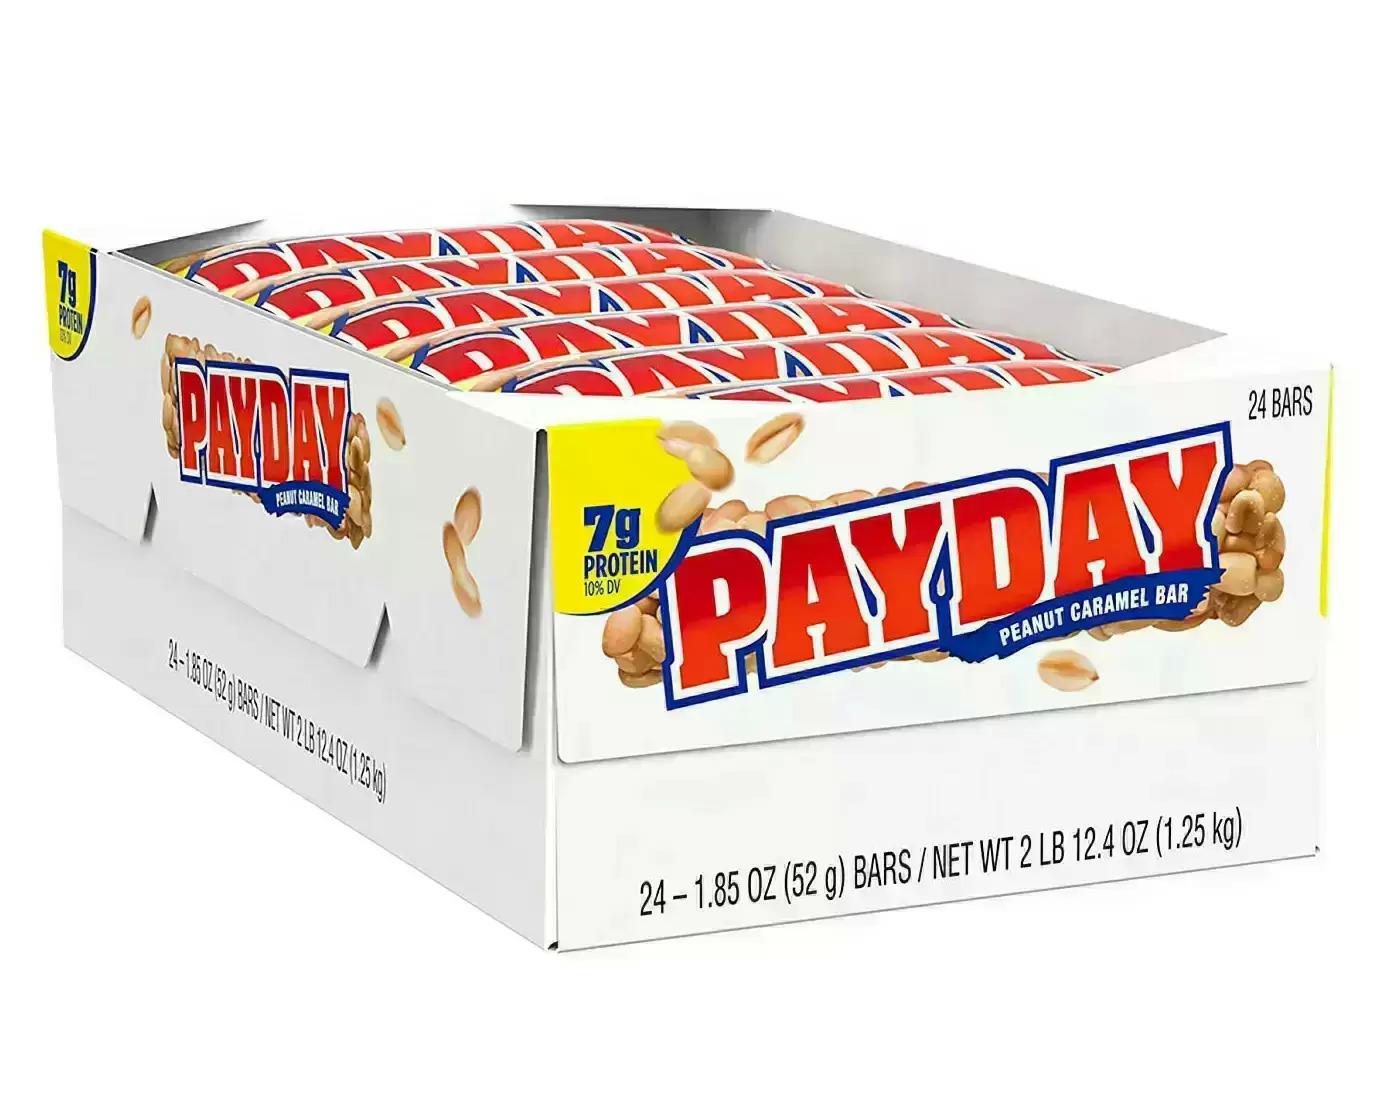 Payday Peanut Caramel Candy 24 Pack for $12.53